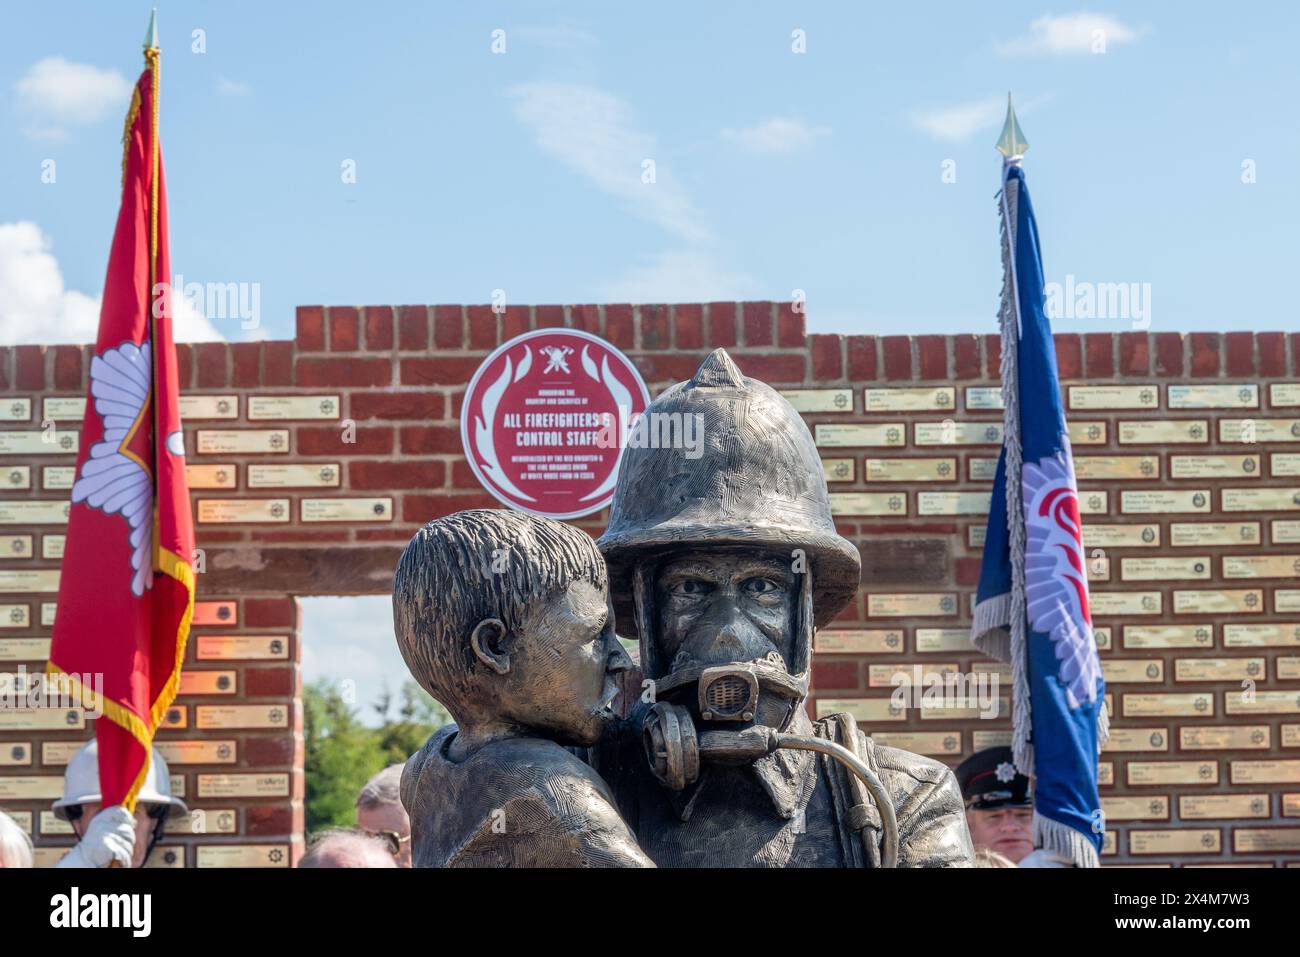 Rettendon, Chelmsford, Essex, UK. 4th May 2024. On National Firefighters Day a statue, memorial wall & gardens have been opened to honour the bravery & sacrifice of firefighters in the UK. The centrepiece firefighter bronze figure was sculpted by artist Dave Taylor, while the National Red Plaque Firefighter Memorial honours individuals that have served. The site also includes landscaped gardens & a vintage Fire Appliance. The project has been supported by Fire Brigades Union, Essex County Fire & Rescue Service & many businesses & members of the public. Credit: Avpics/Alamy Live News Stock Photo